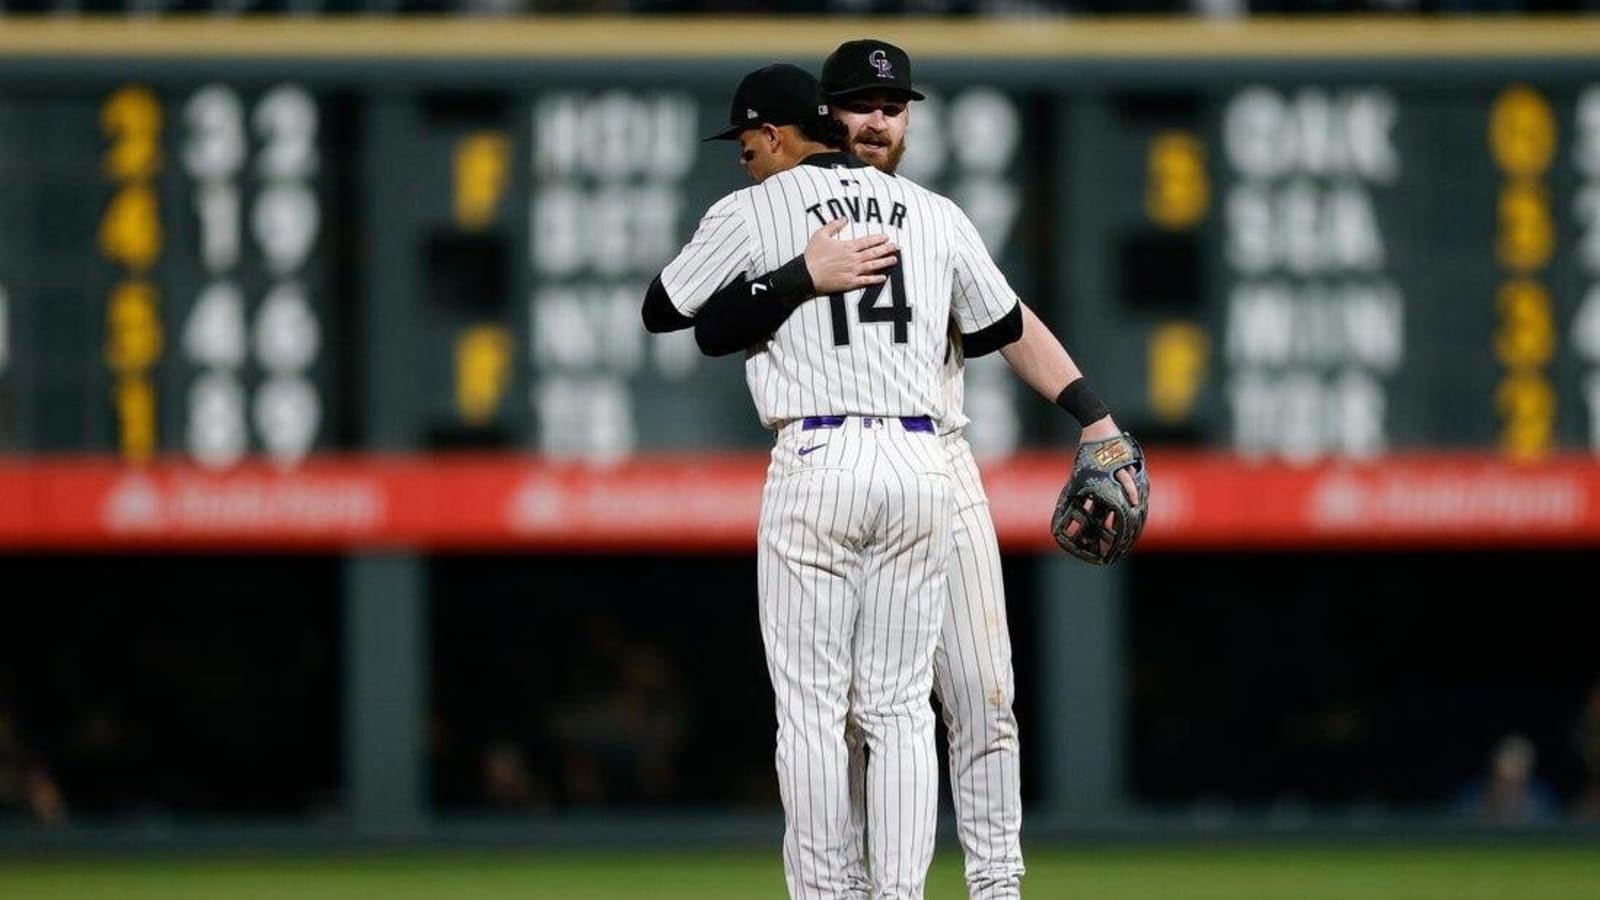 Rockies host Rangers in quest for first series win